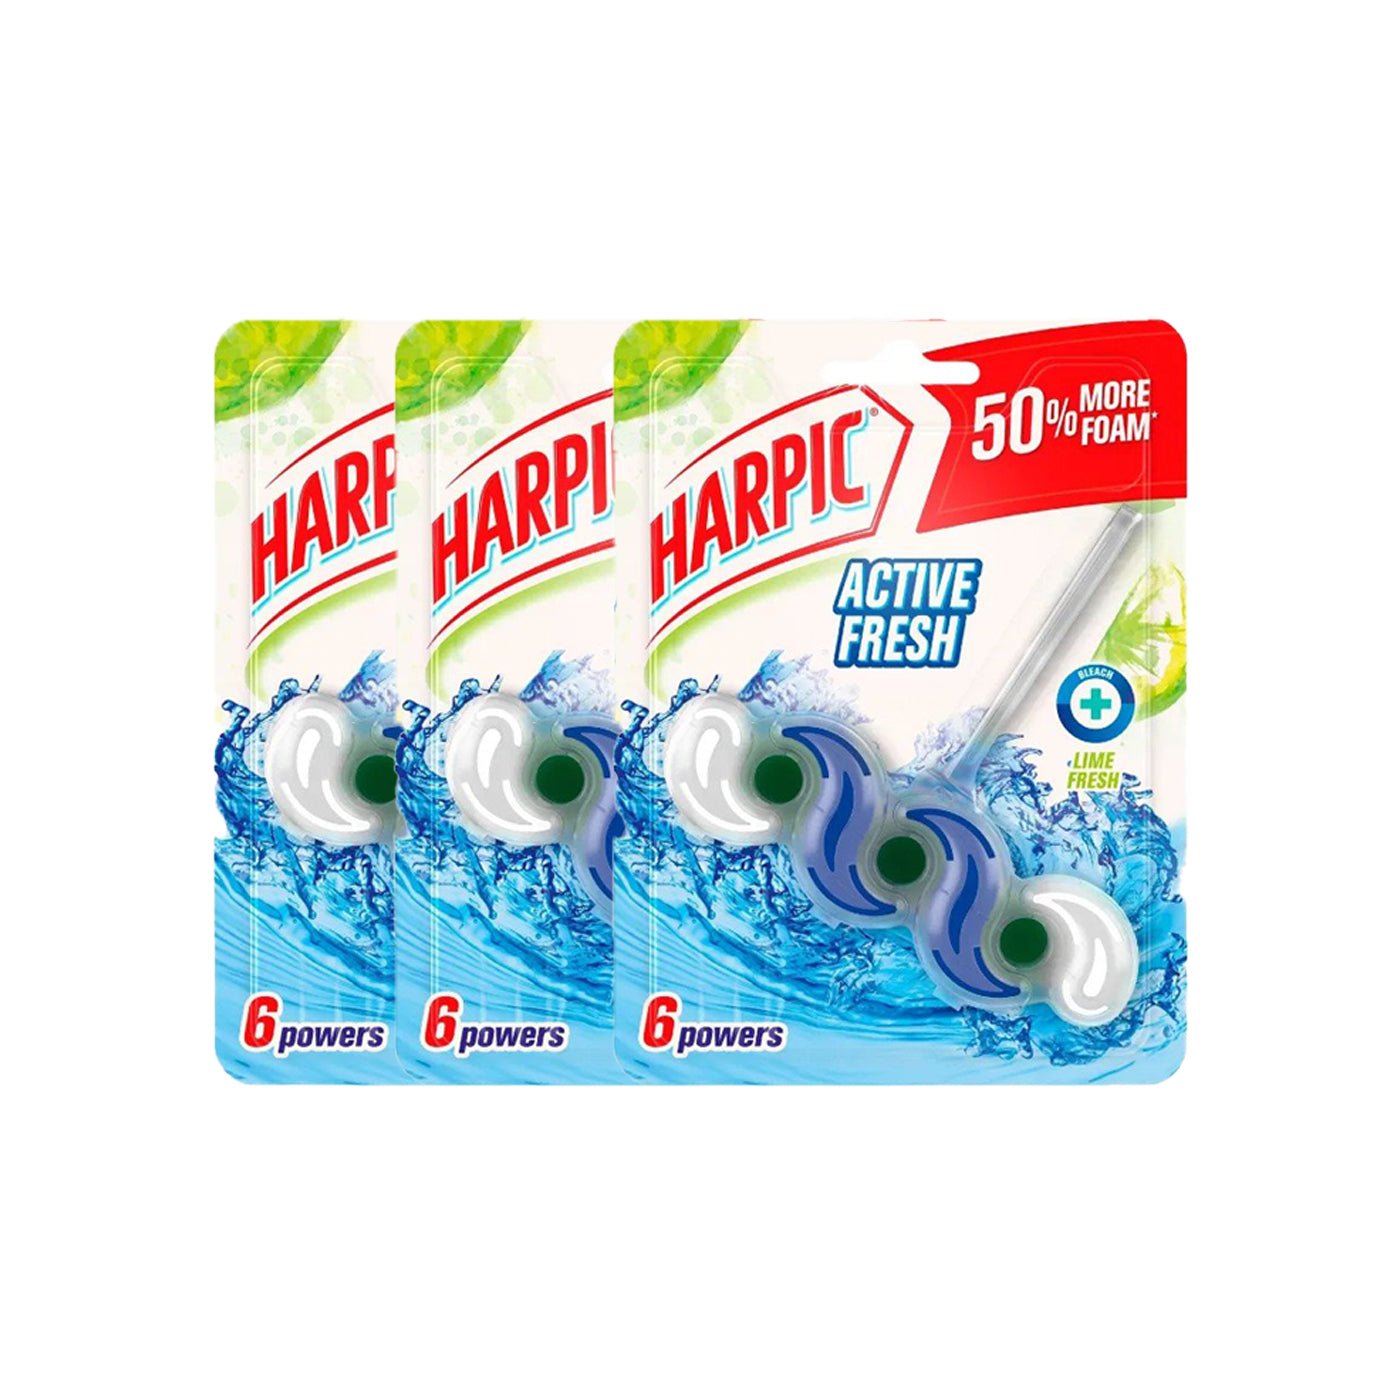 Harpic Active Fresh Toilet Block - Lime Fresh 3 in a bundle pack